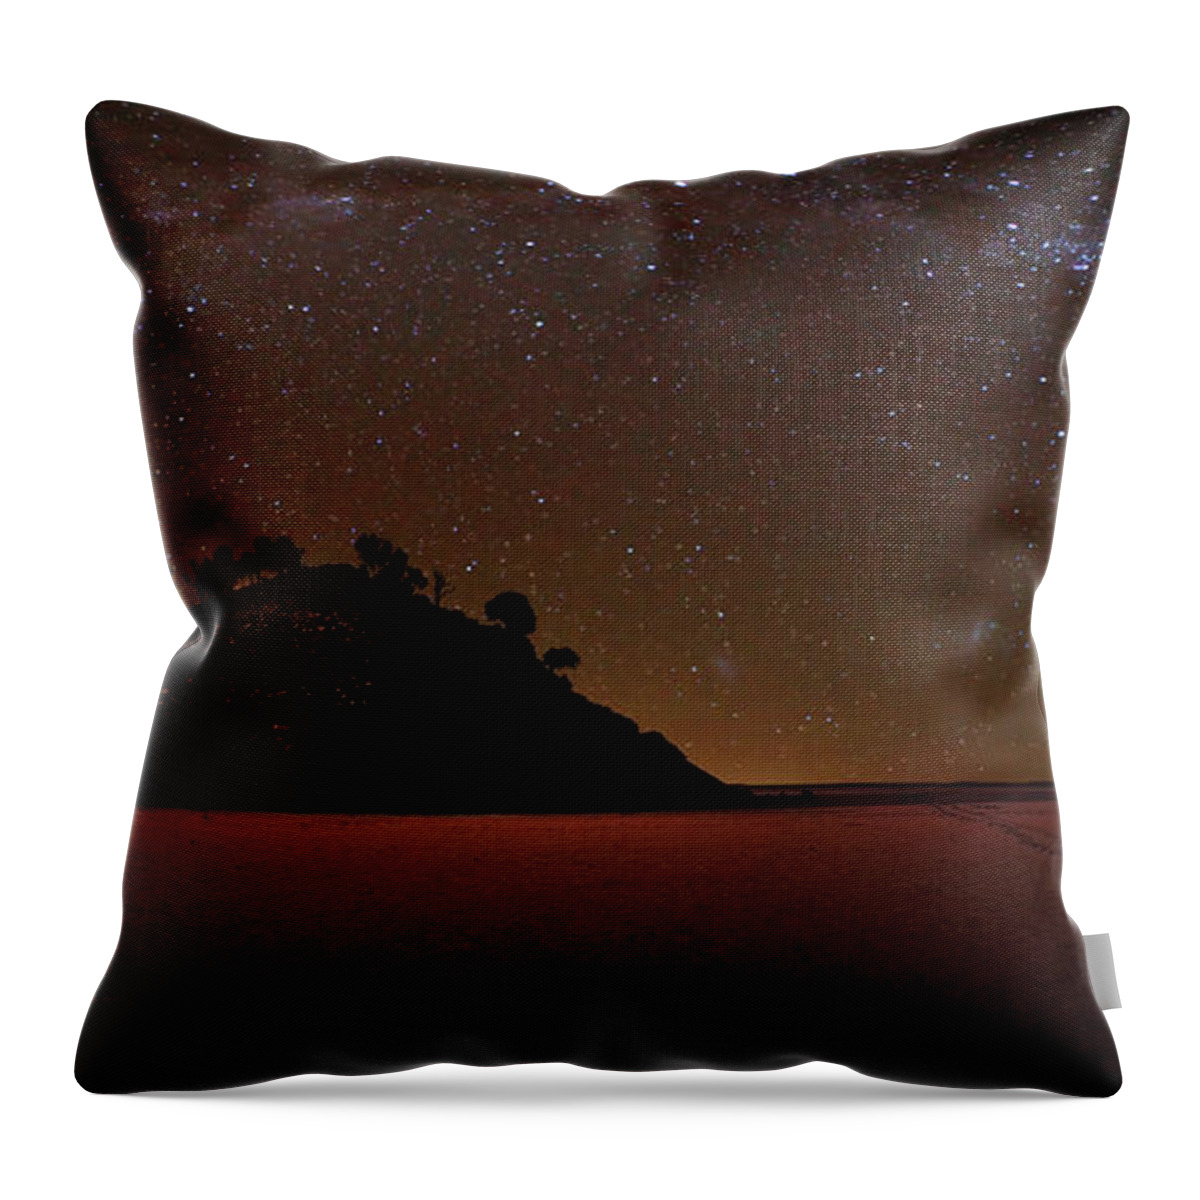 Tranquility Throw Pillow featuring the photograph Star Panorama by Picturesbysteve